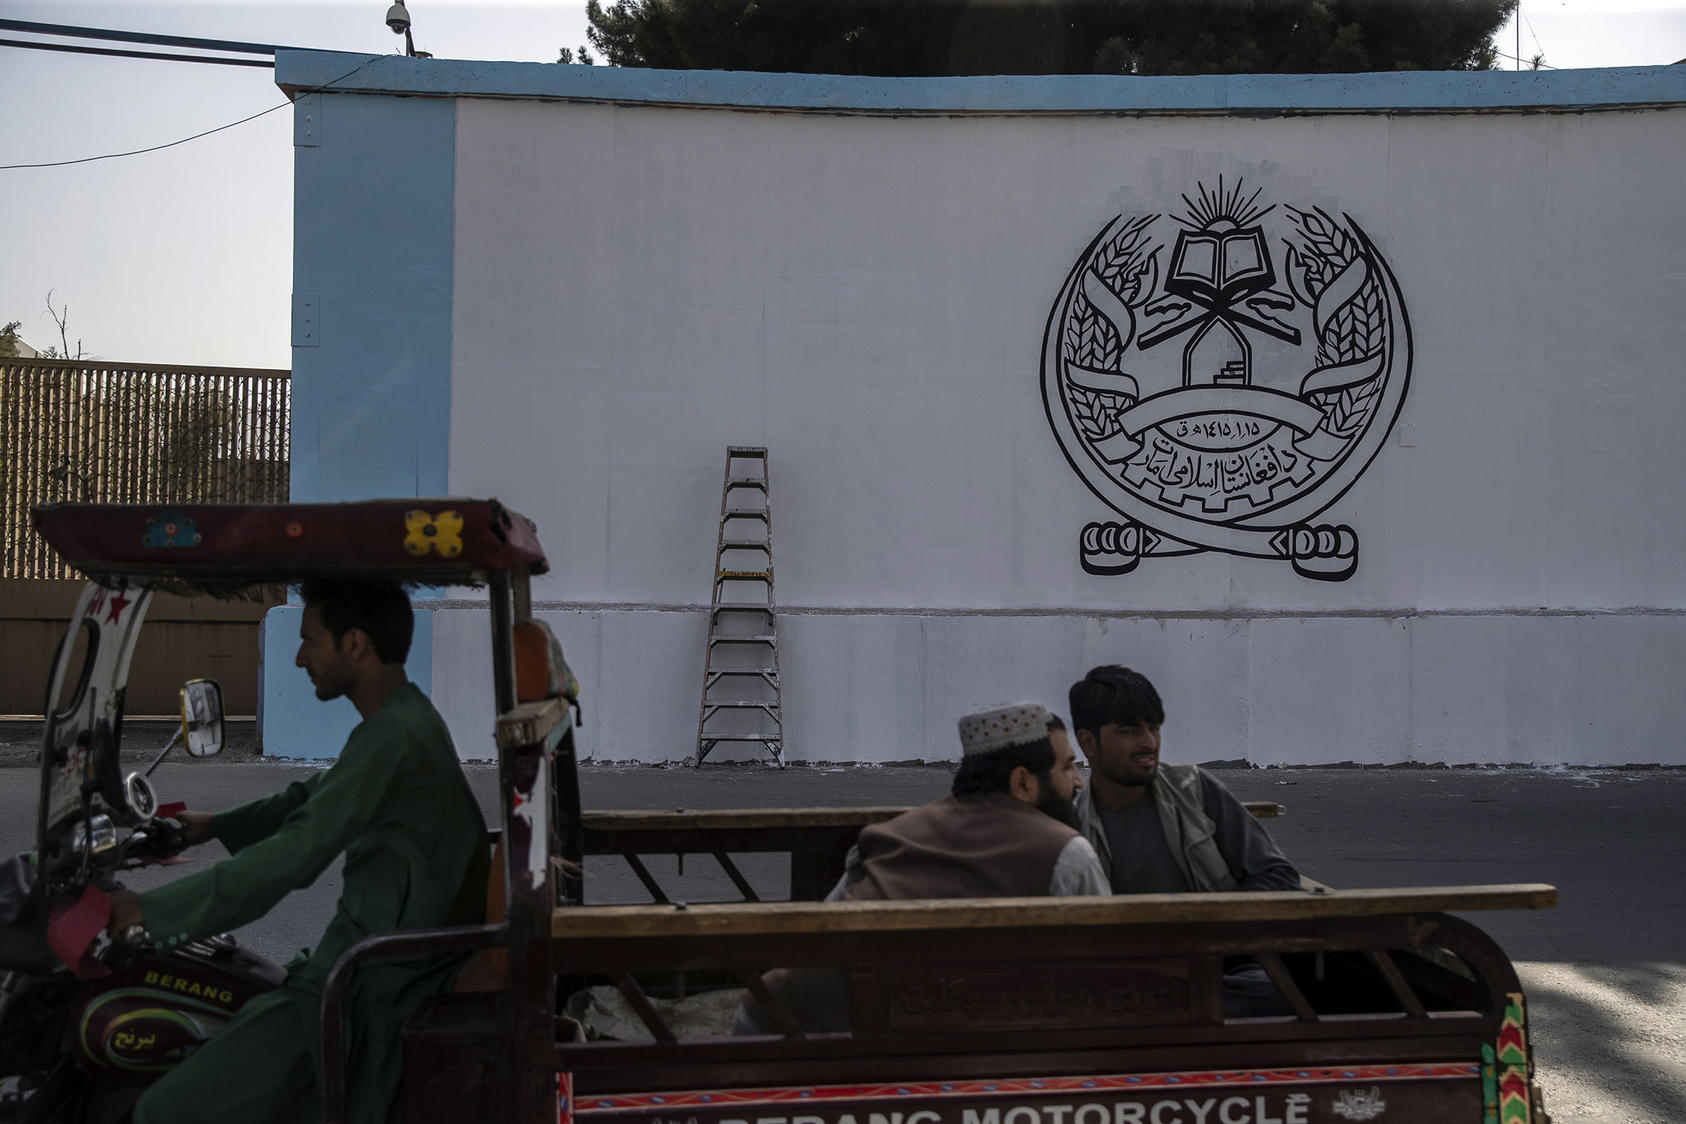 The seal of the Islamic Emirate of Afghanistan is painted on a wall around the former U.S. Embassy in Kabul. Monday, Sept. 6, 2021. (Victor J. Blue/The New York Times)